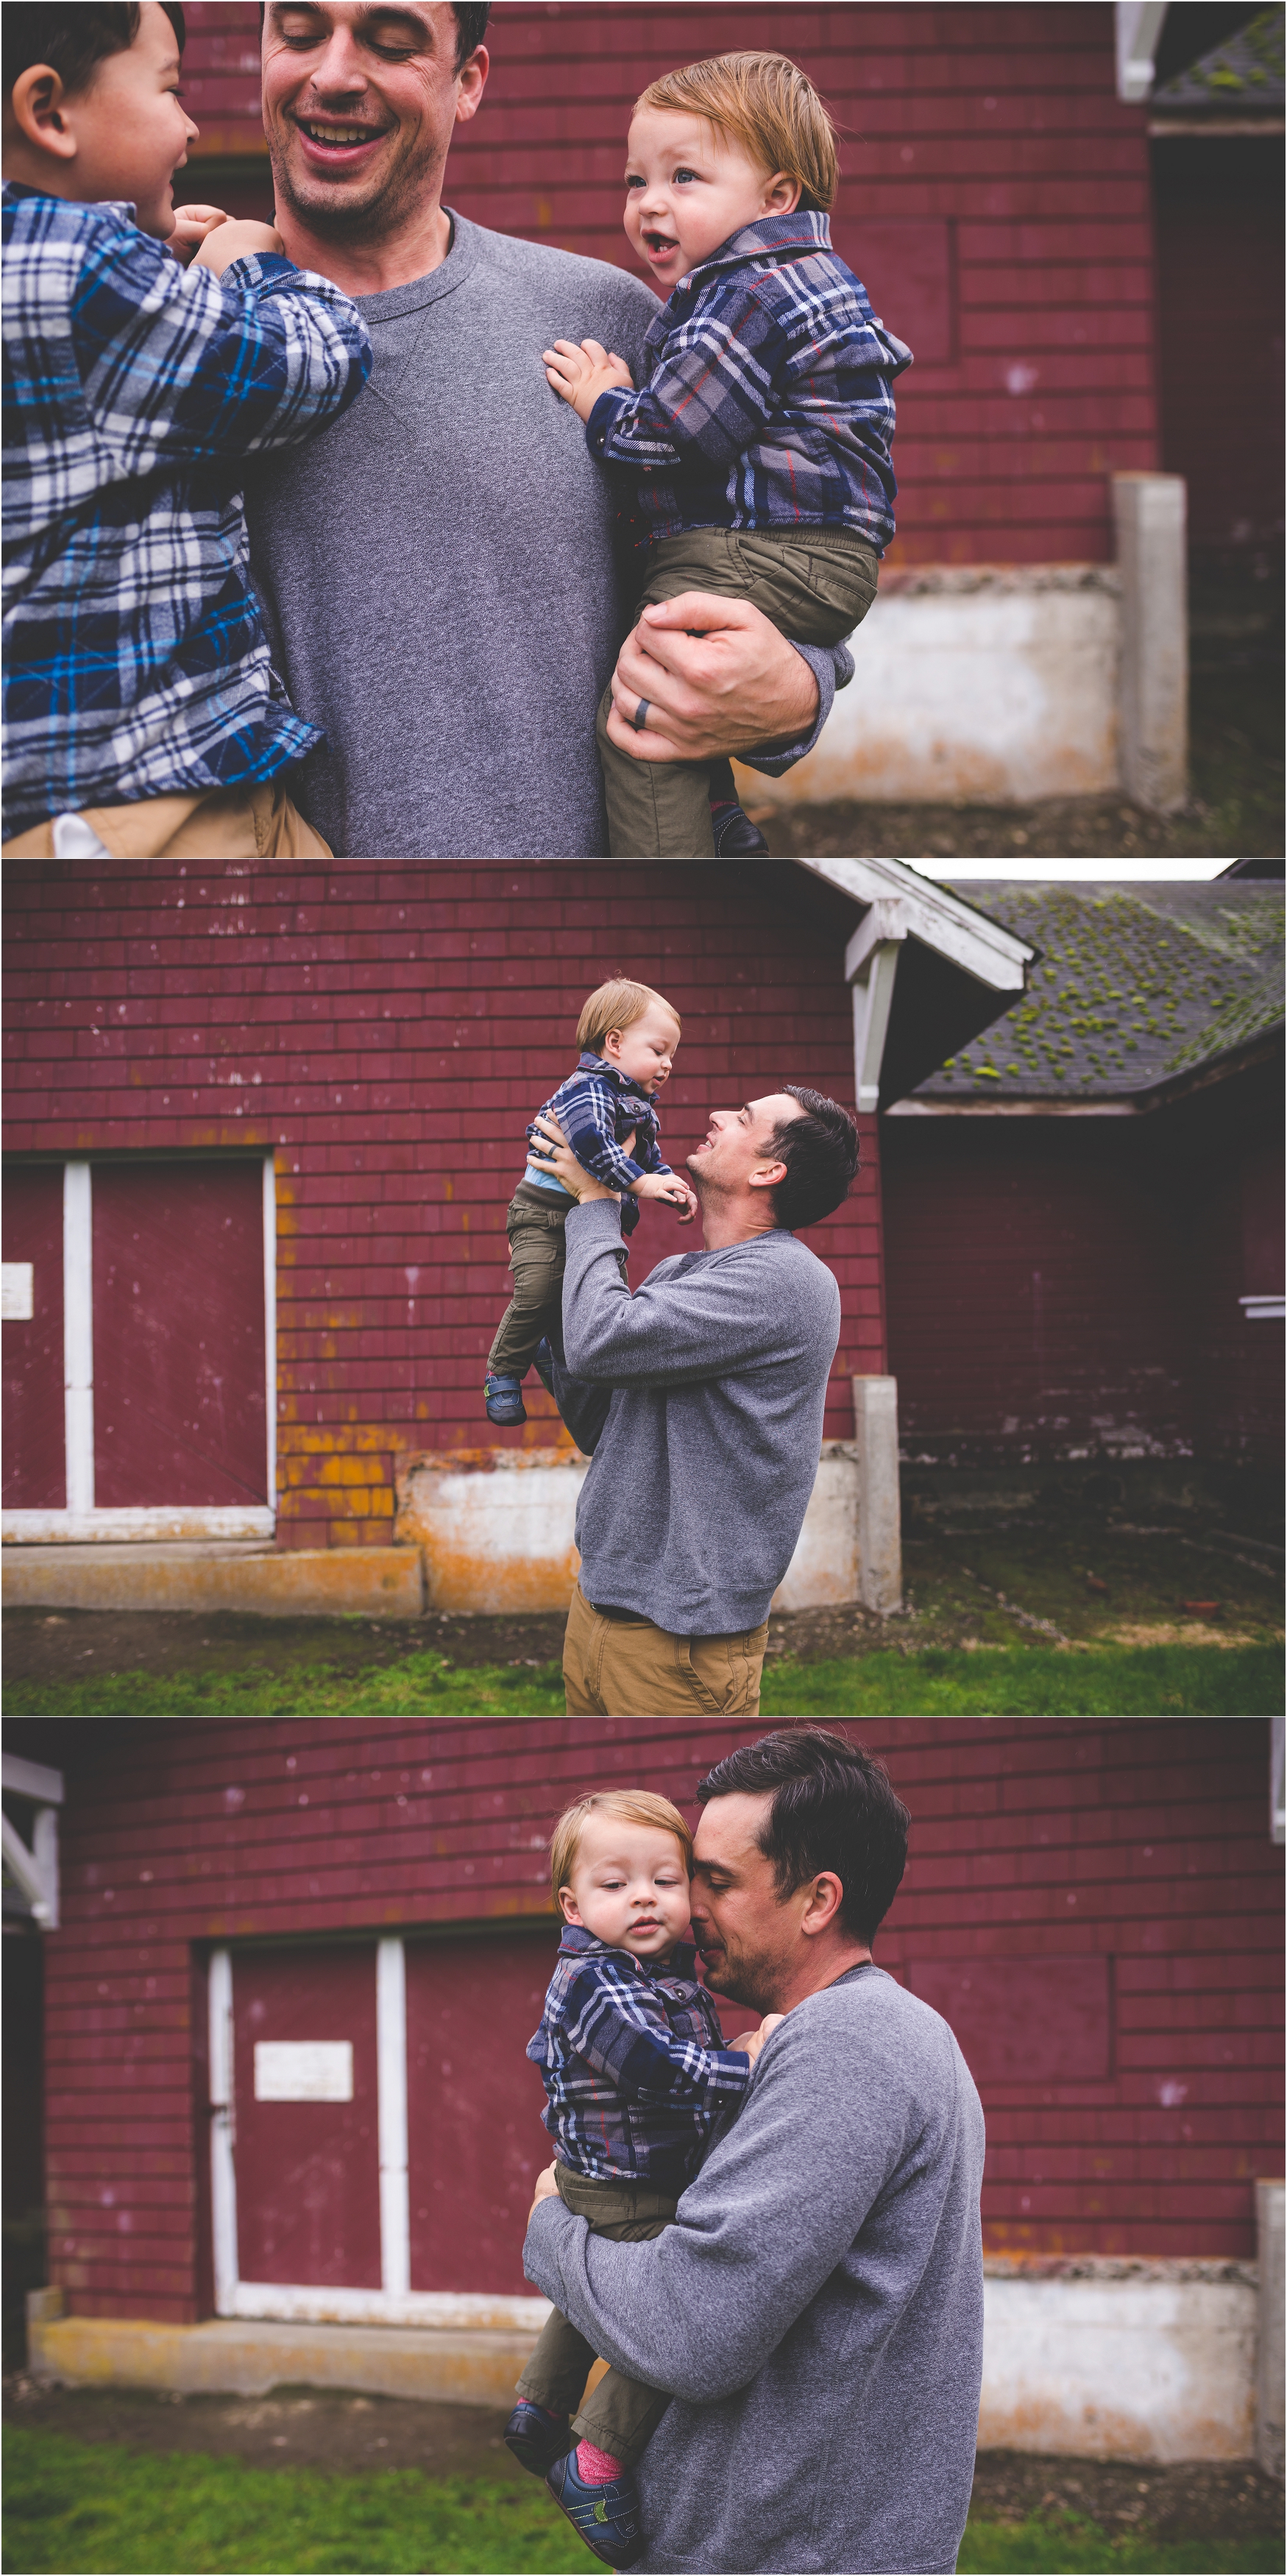 fort-steilacoom-park-family-session-jannicka-mayte-pacific-northwest-lifestyle-photographer_0008.jpg